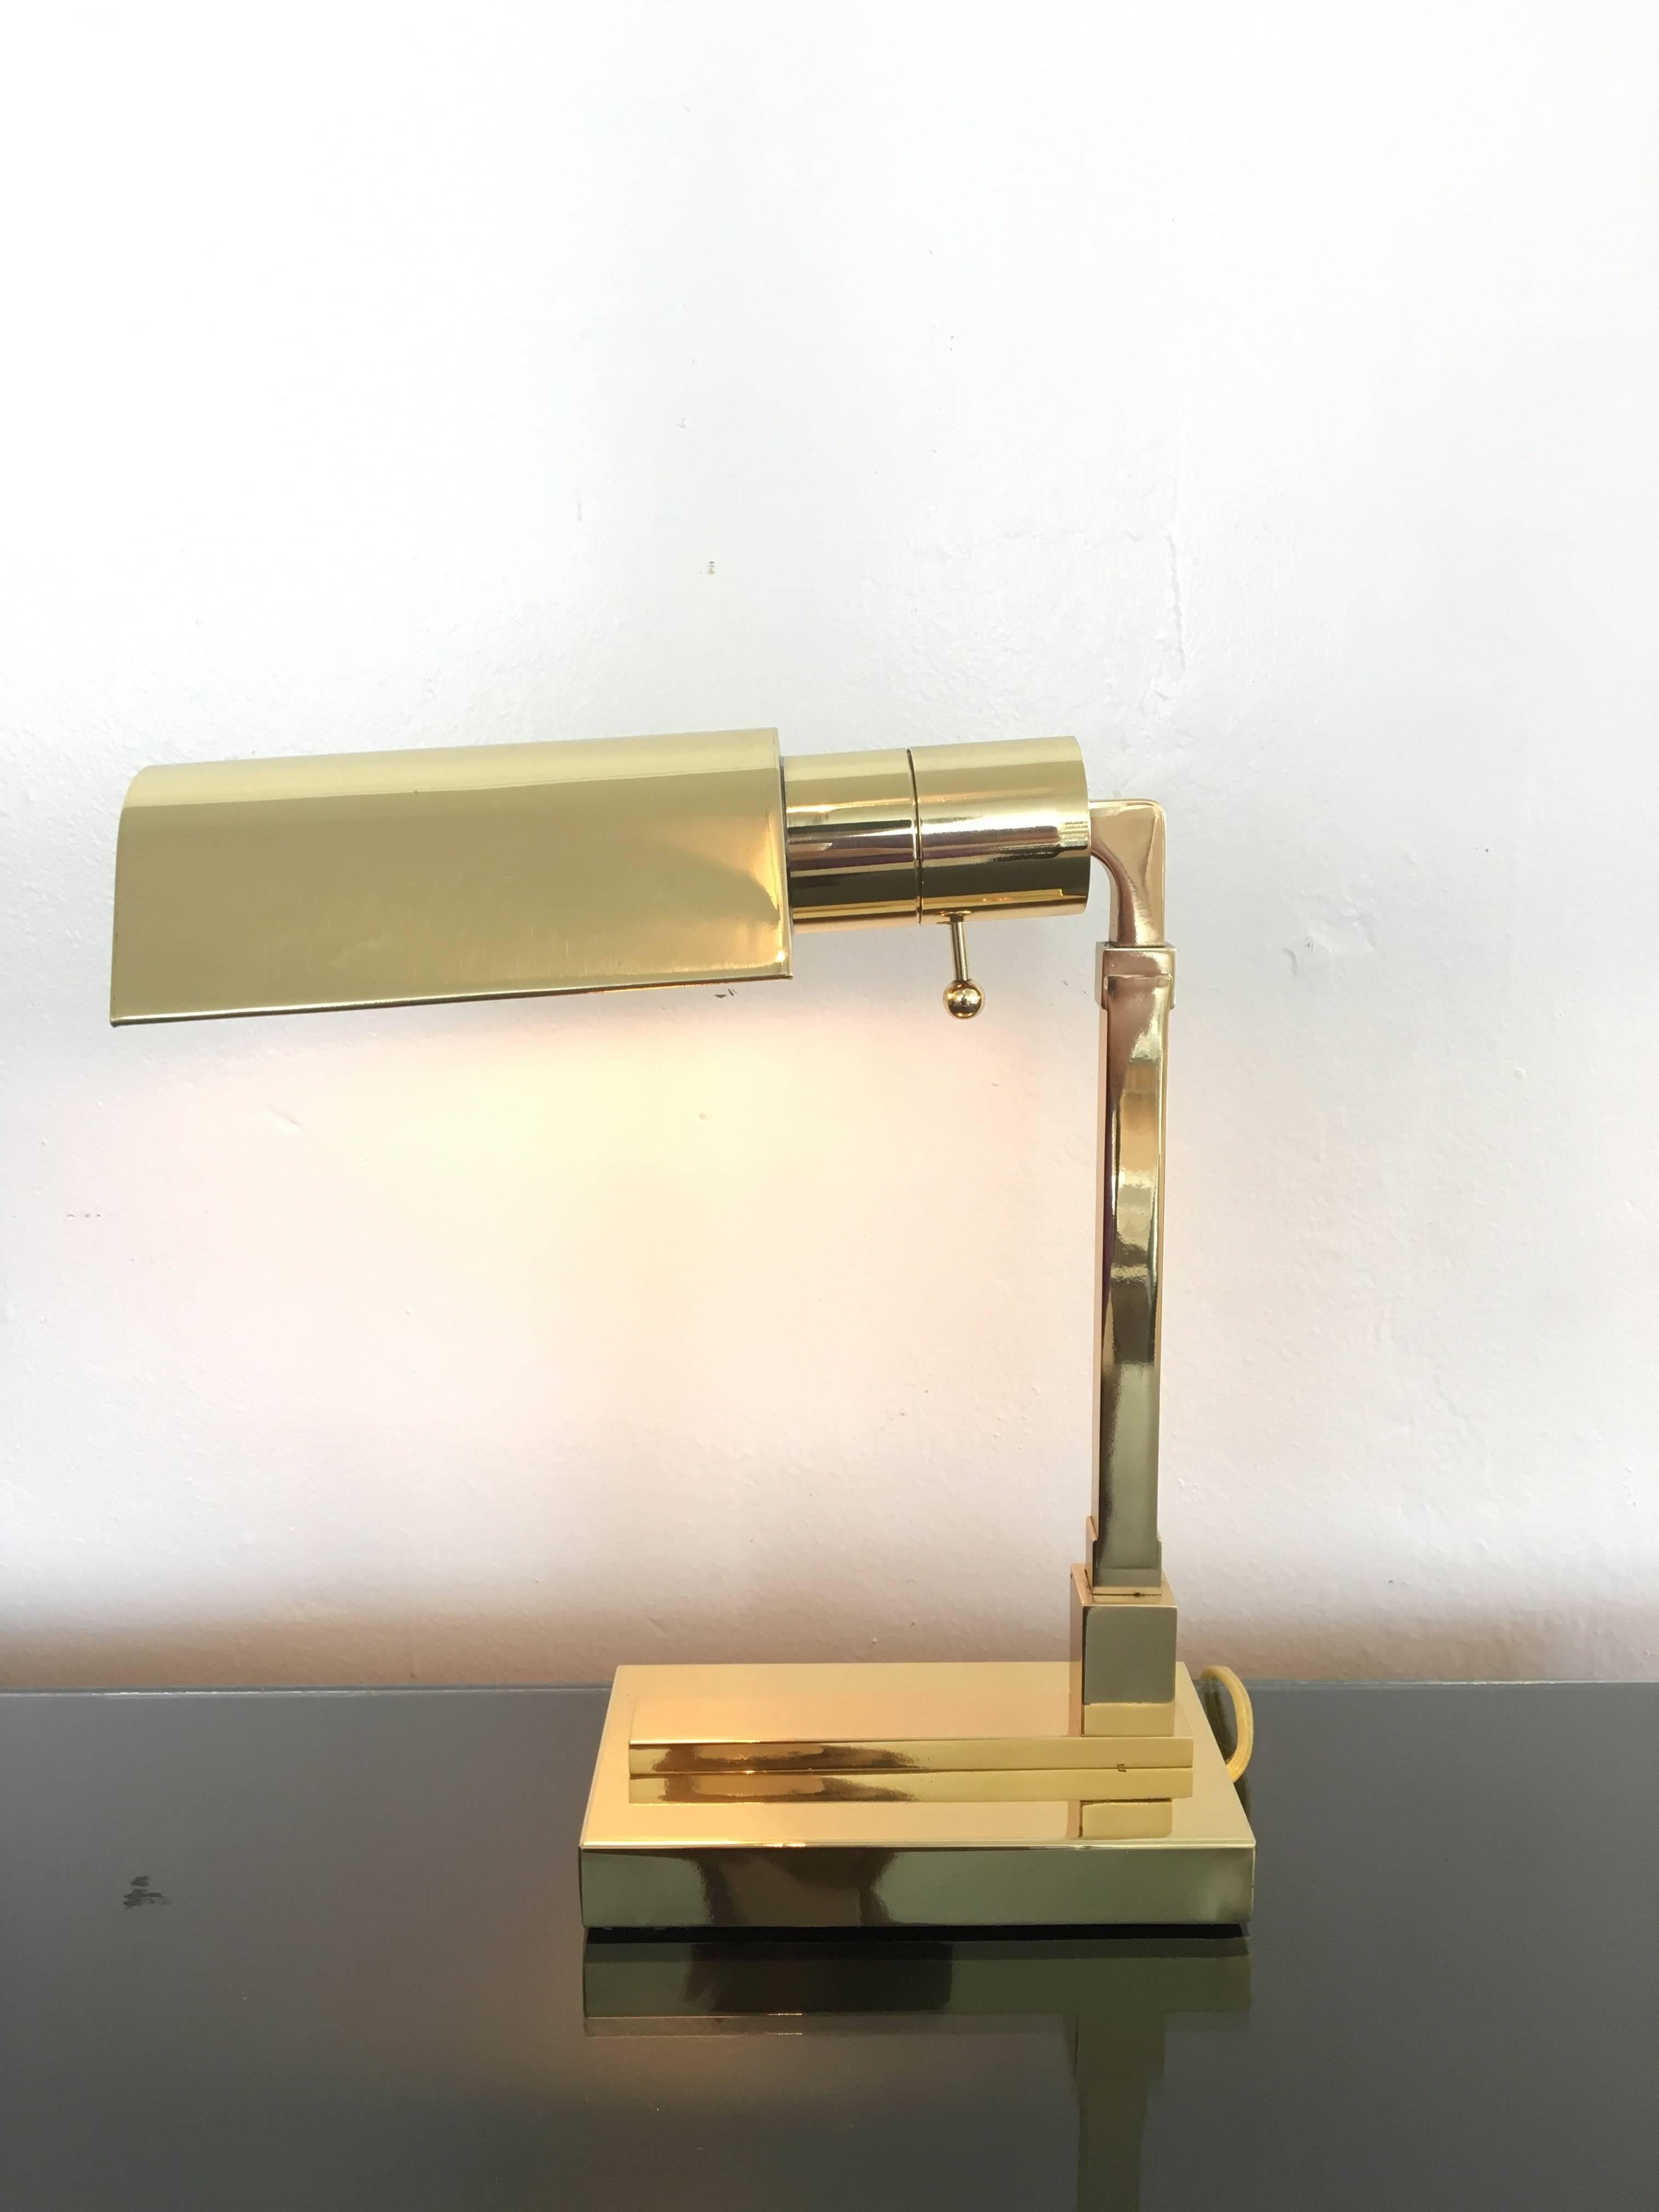 A beautiful small polished brass desk lamp by Casella Lighting.
Professionally polished and rewired with a high/low switch.